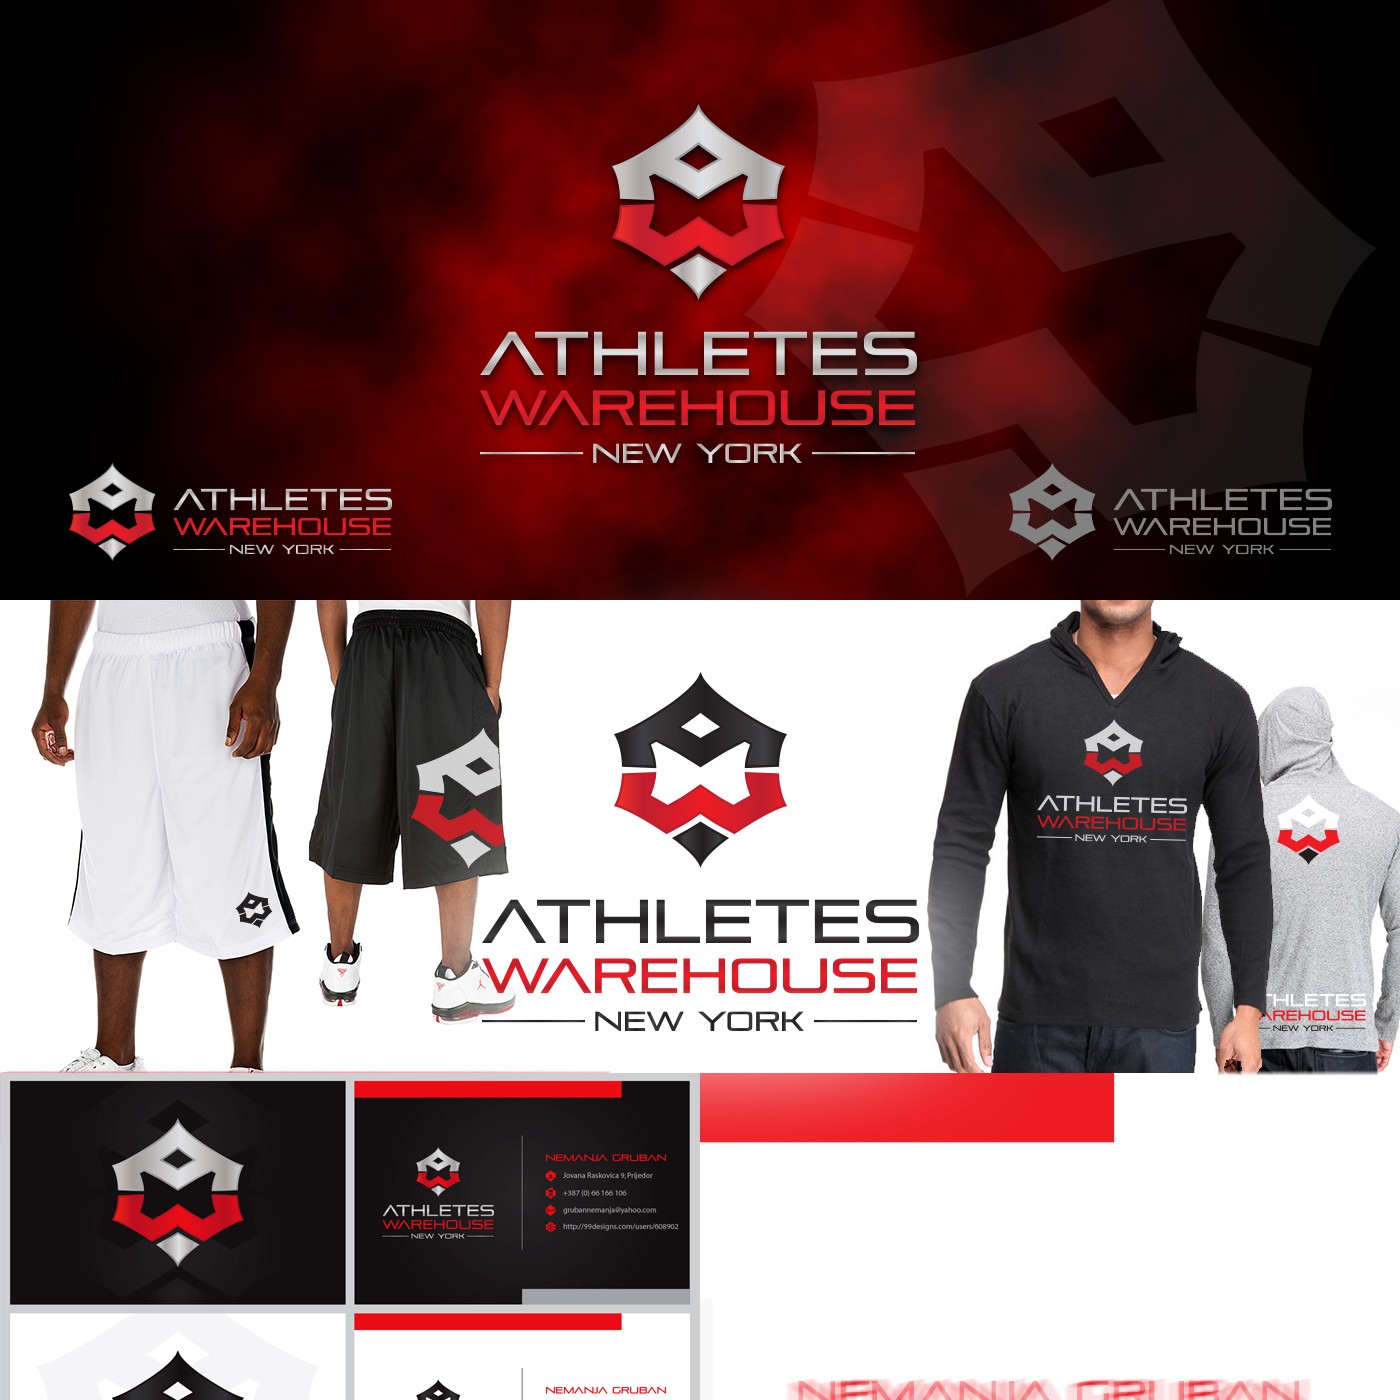 Help ATHLETES WAREHOUSE (NEW YORK)  with a new logo